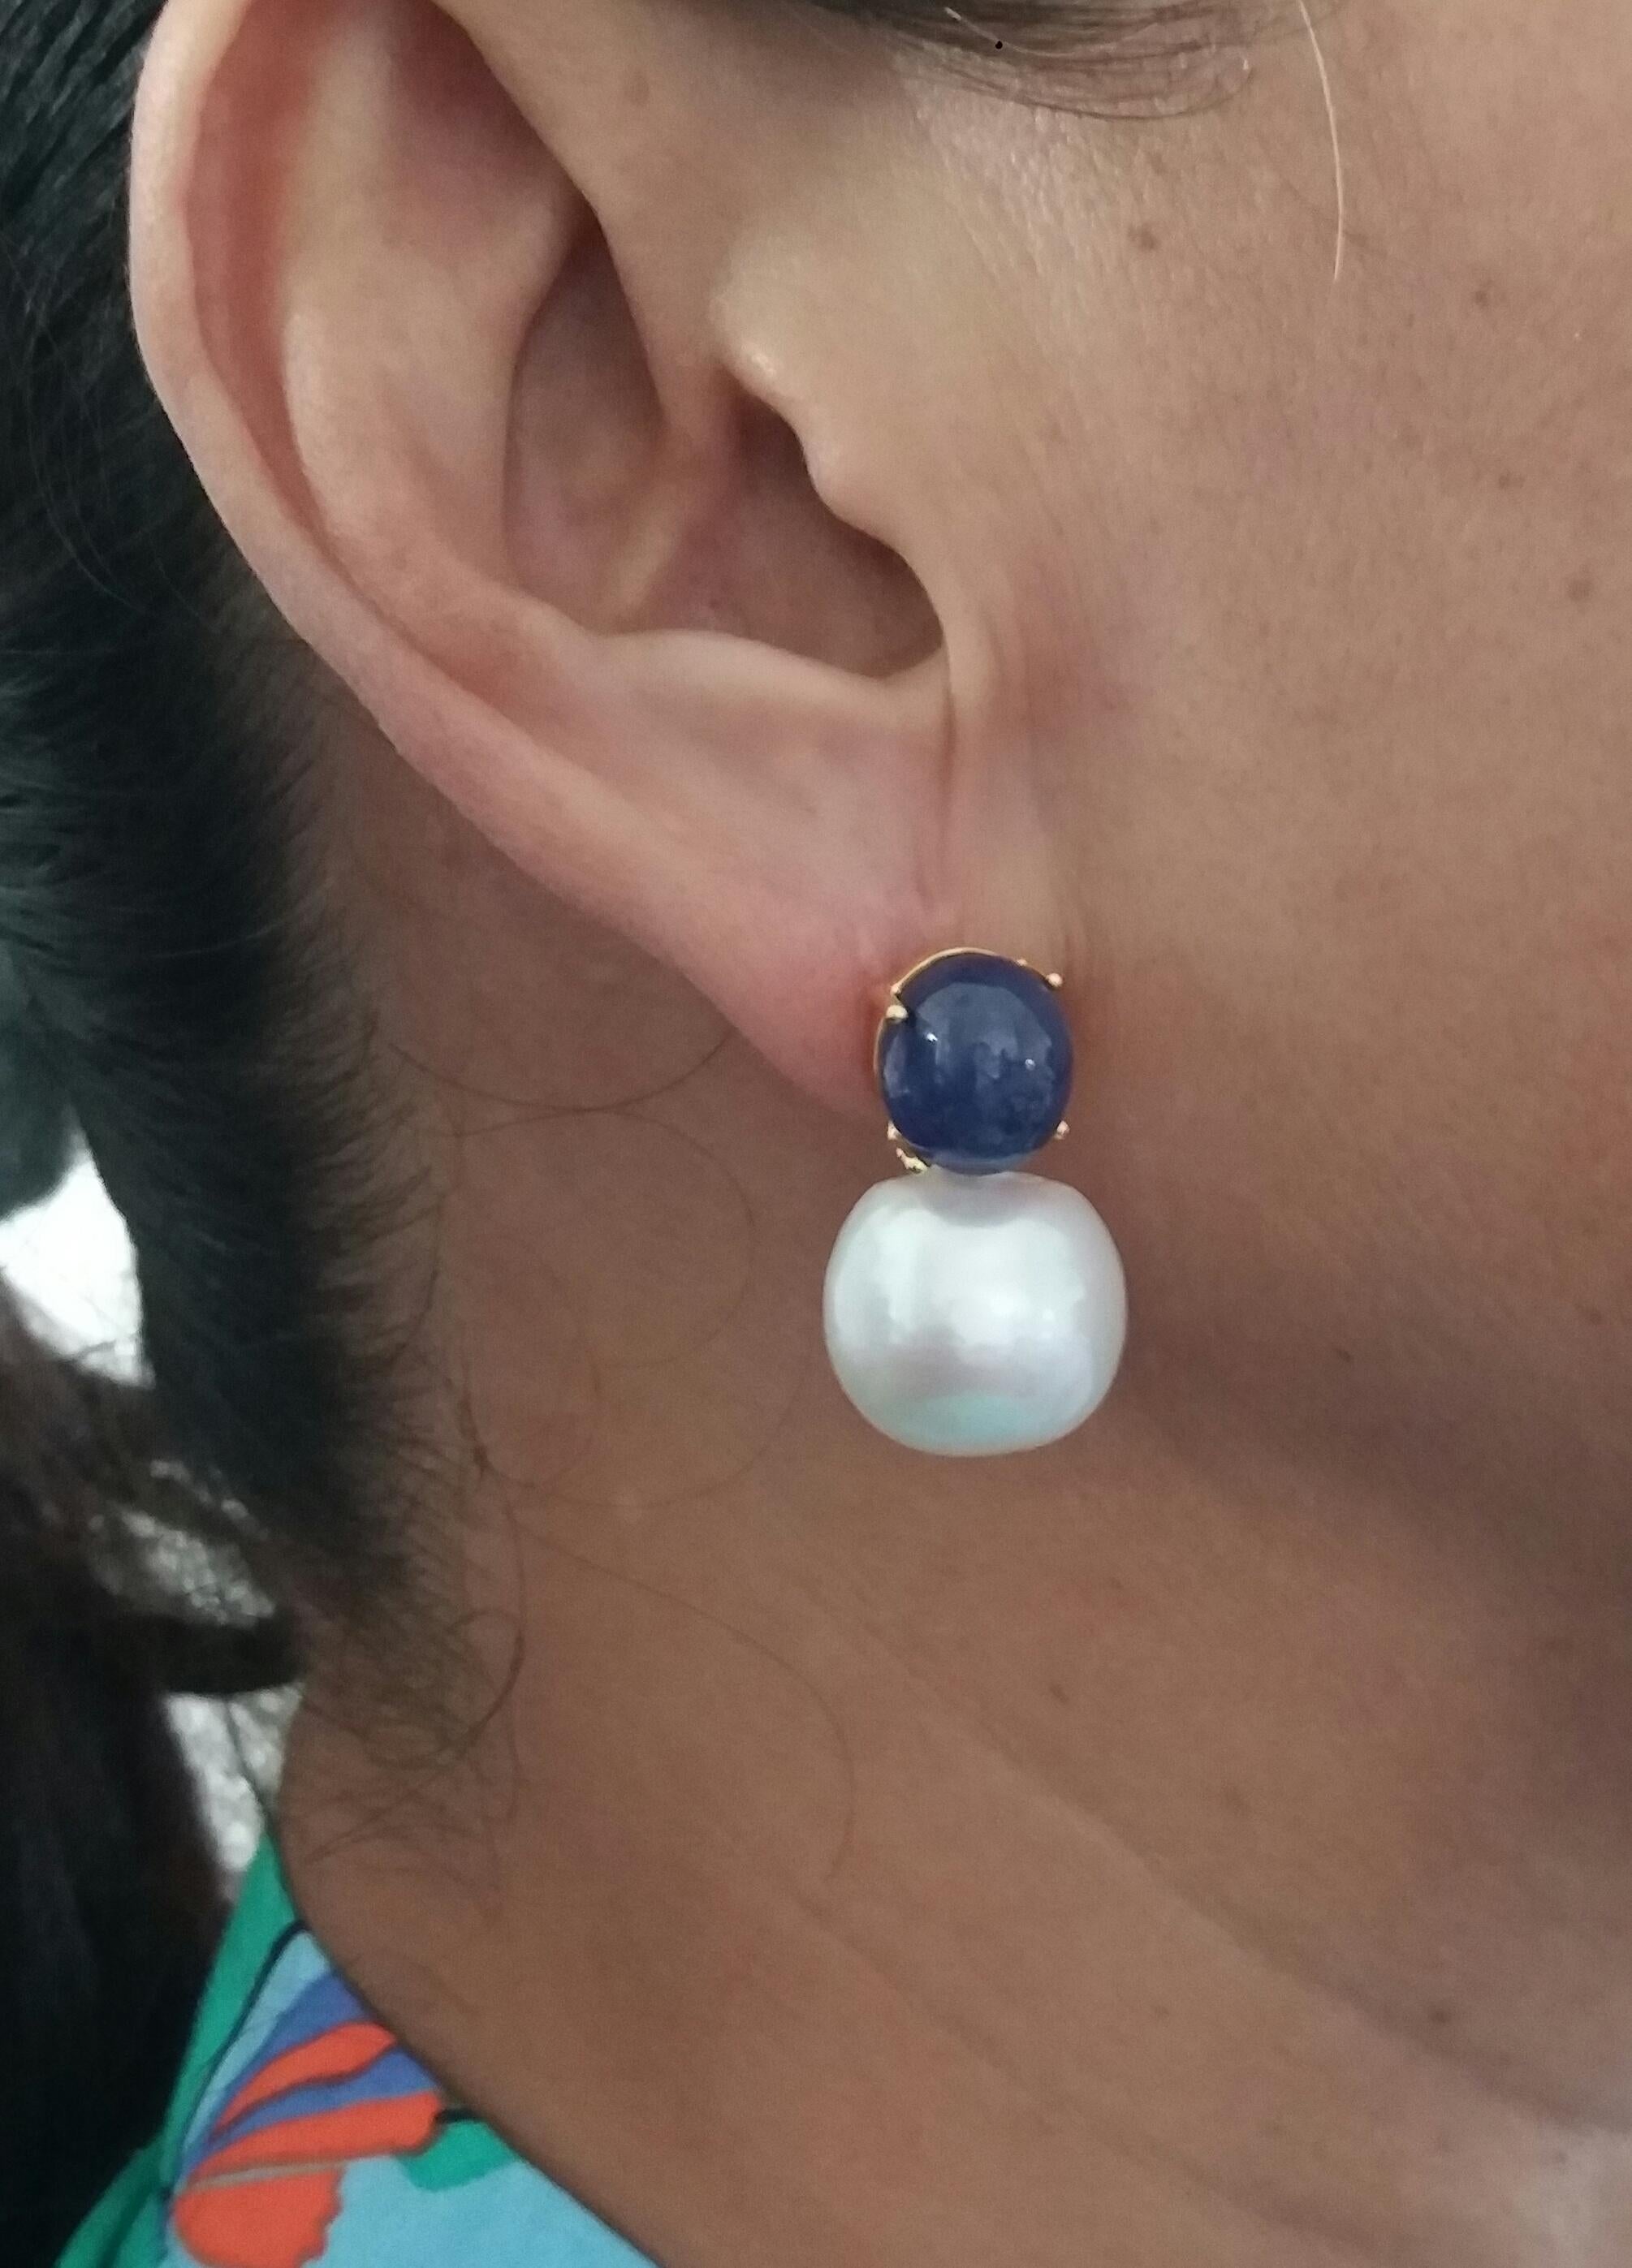 Simple chic stud earrings with a pair of Oval Blue Sapphire Cabs measuring 10 x 11 mm set in solid 14 Kt. yellow gold on the top and in the lower parts 2 unusual  big size and excellent luster White Baroque Pearls measuring 16 x 17 mm and weighing